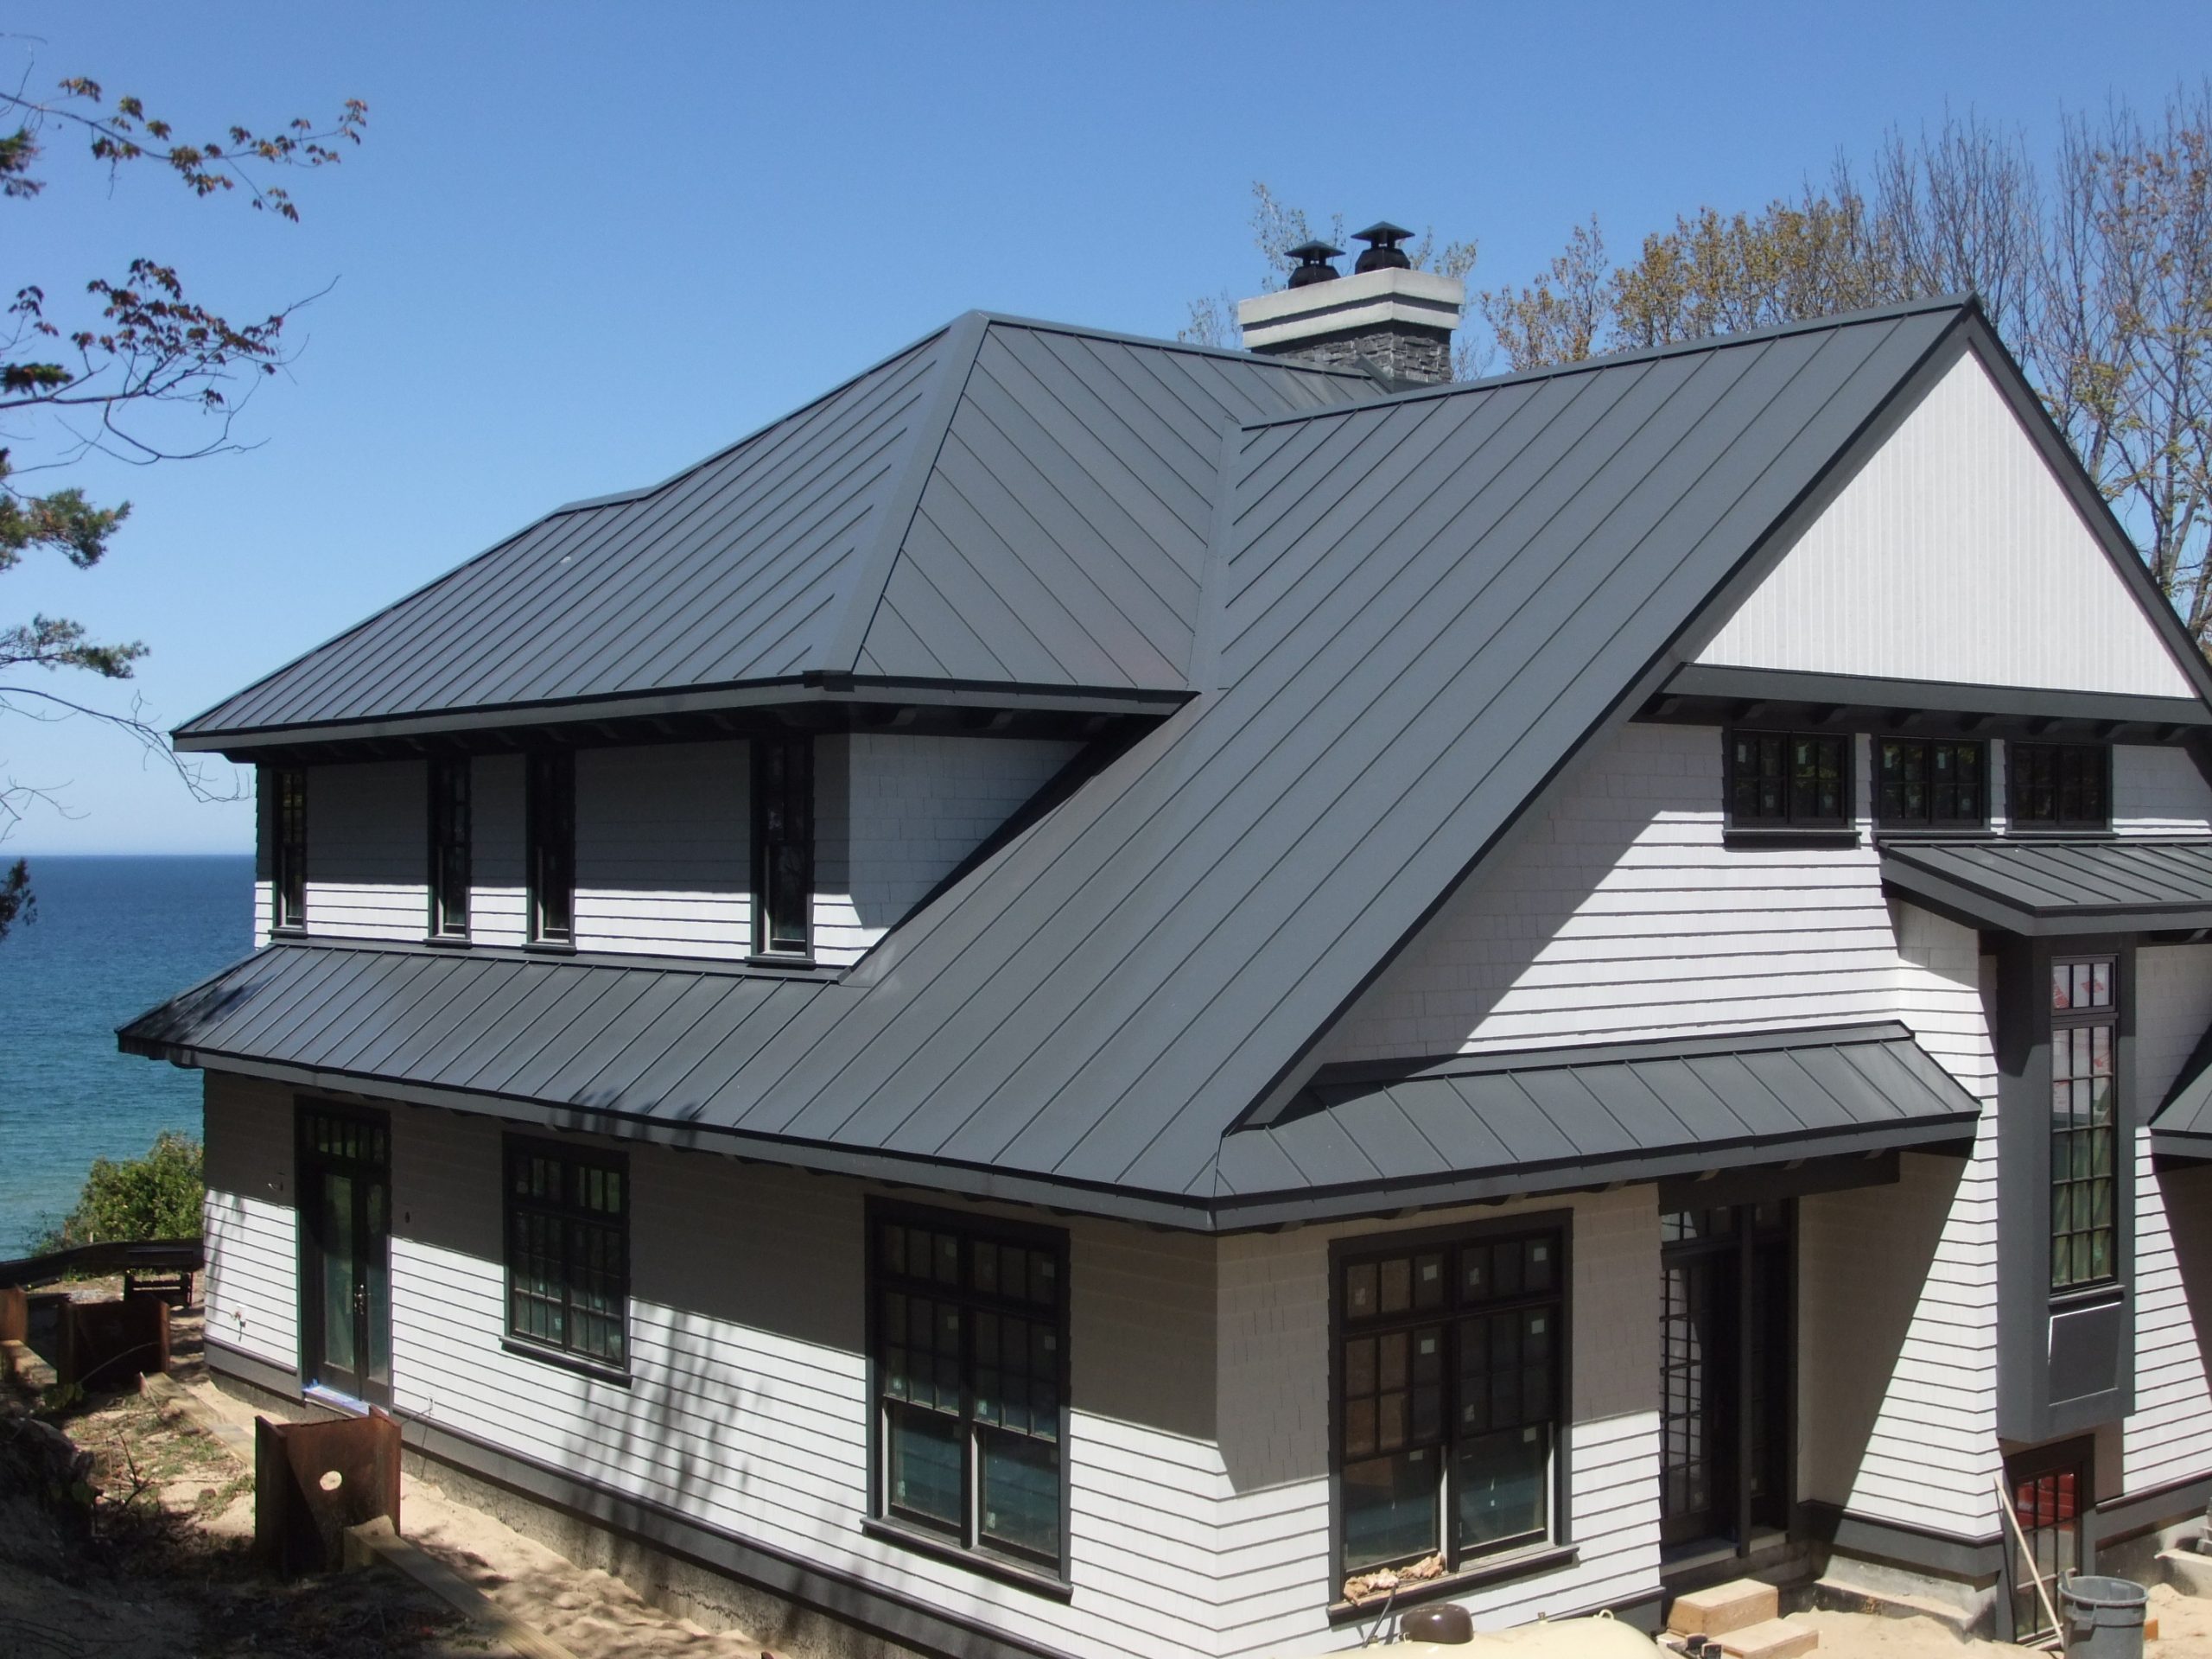 Residential Metal Roofing Weathers the Storm of Market Forces